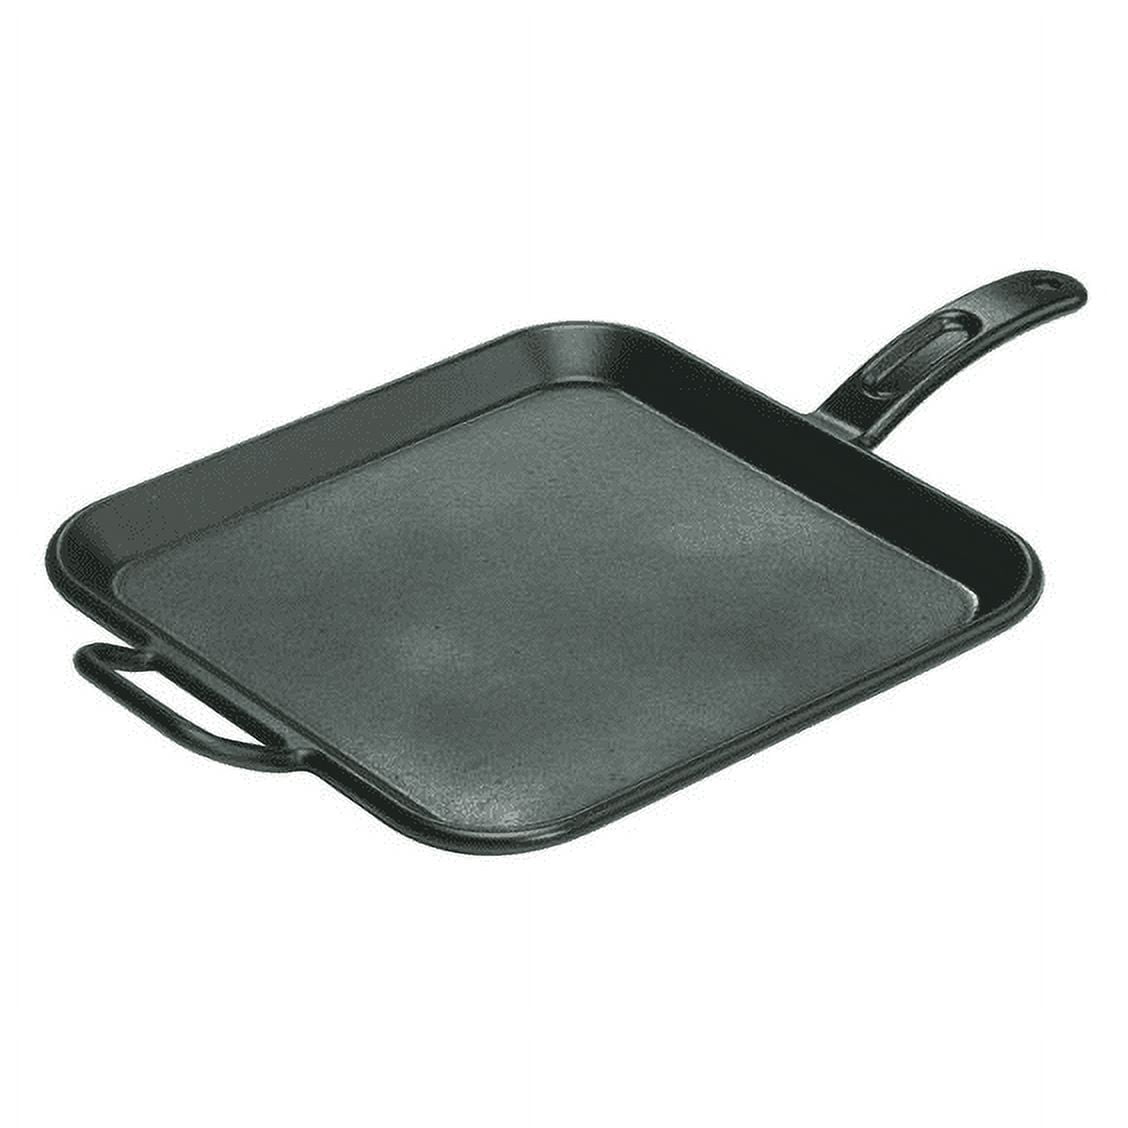 Lodge 12? Square Griddle Seasoned Cast Iron, P12SG3, with assist handle 